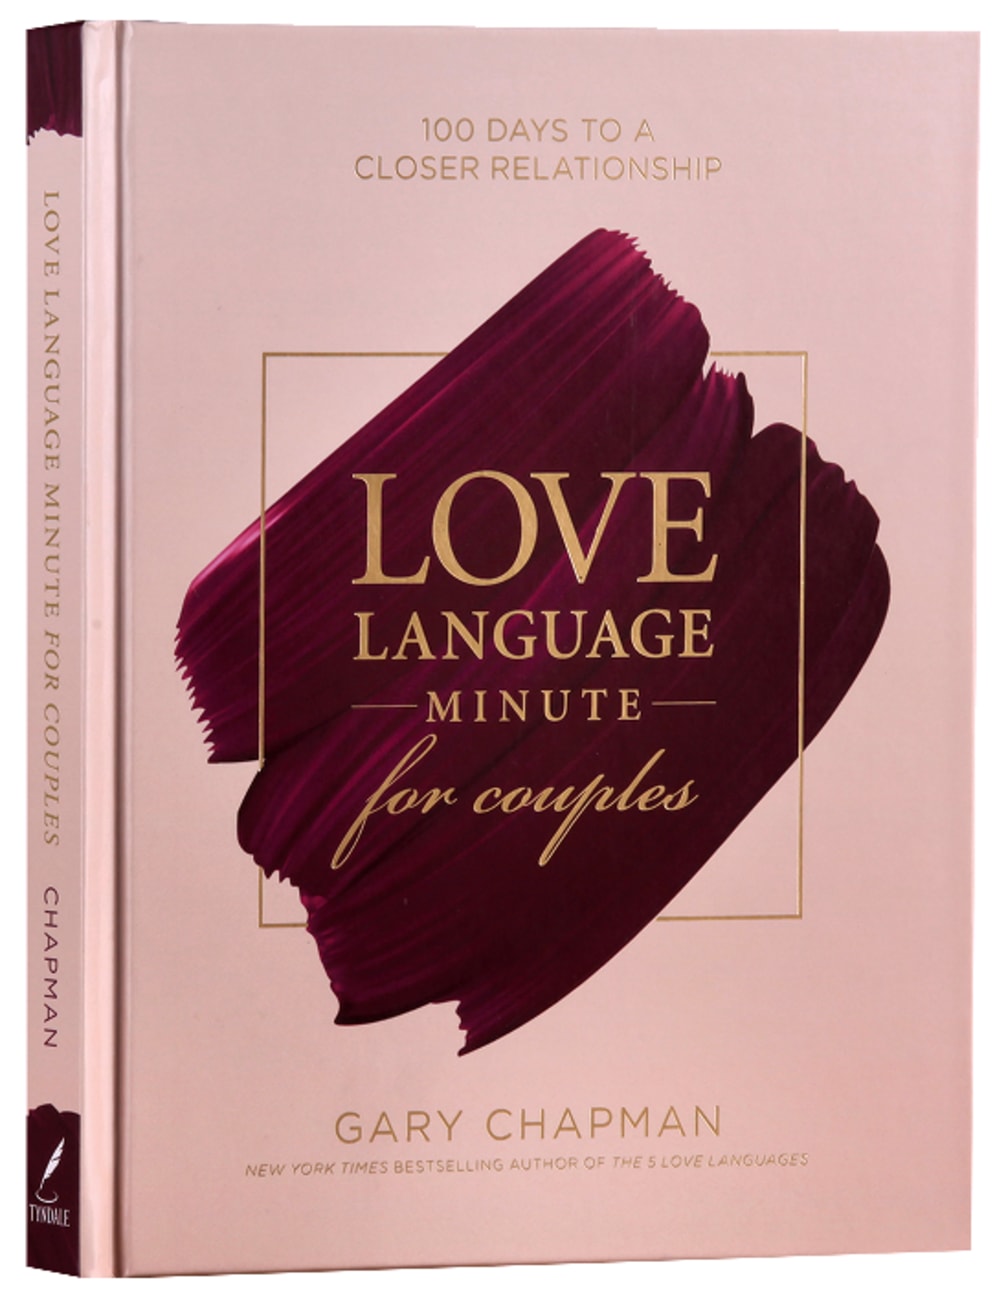 Love Language Minute For Couples: 100 Days to a Closer Relationship Hardback